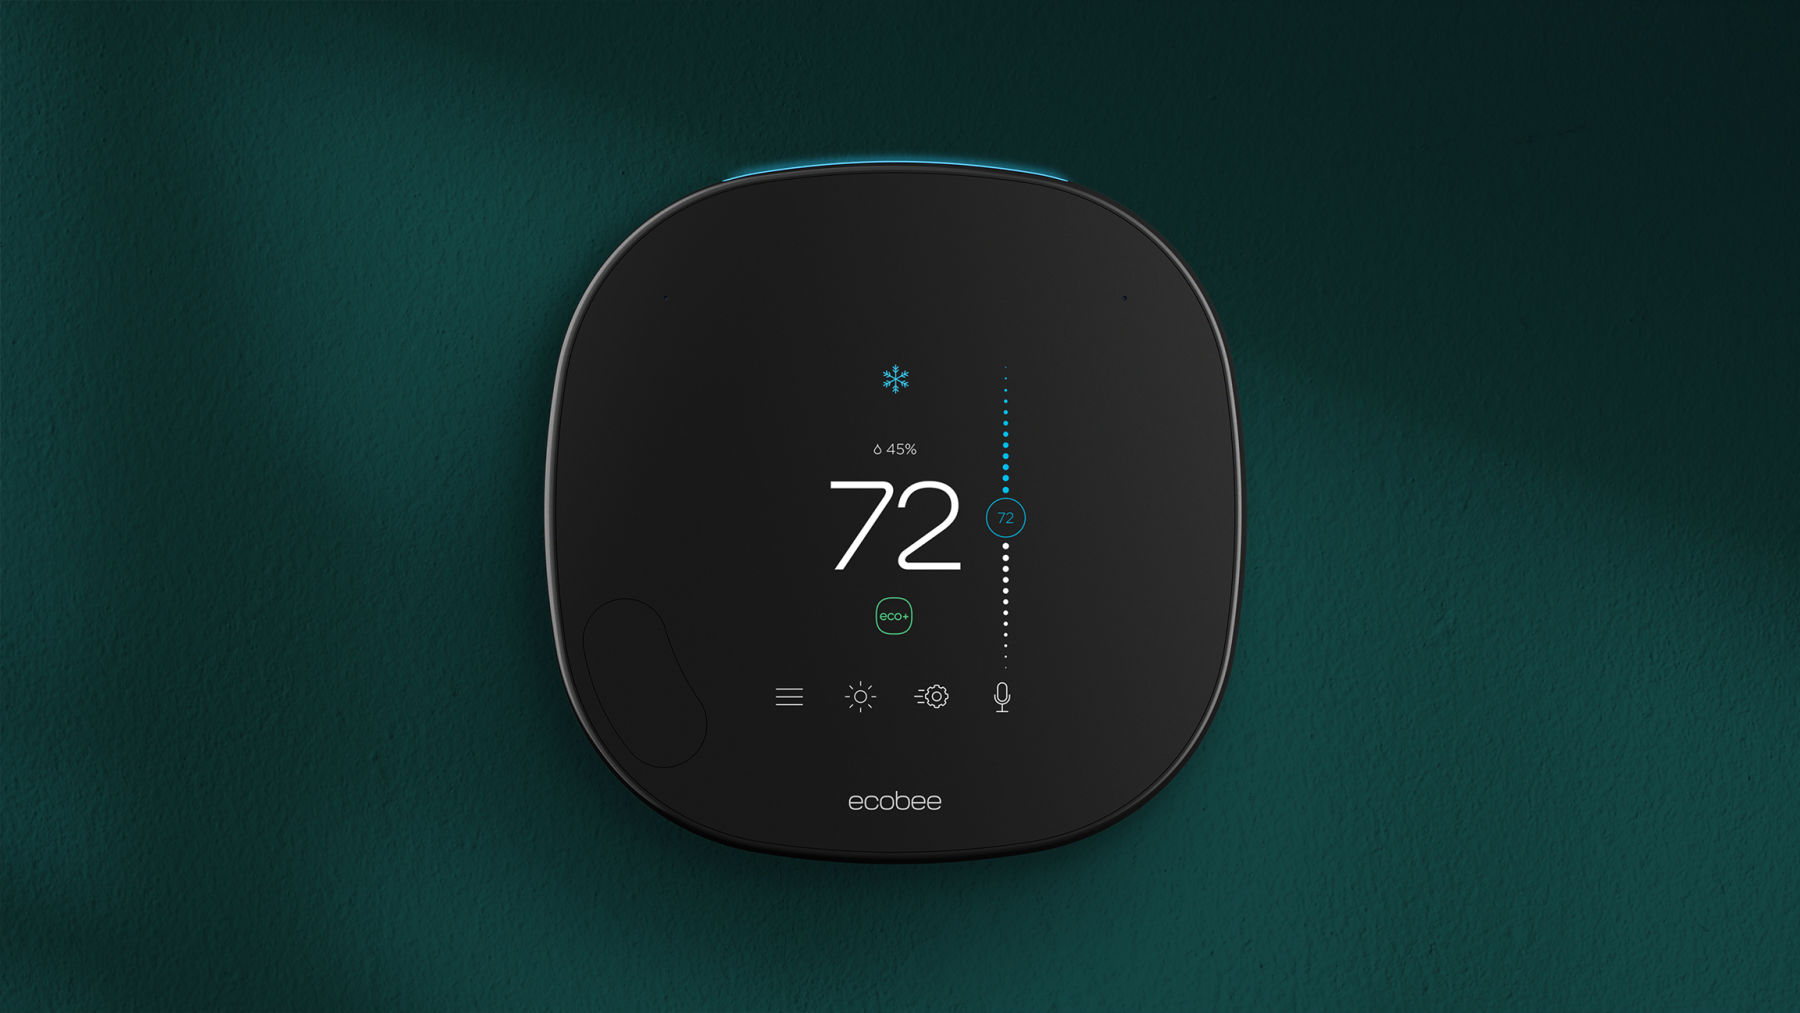 eco+ upgrades the intelligence in all ecobee thermostats with the squircle shape, including ecobee3, ecobee3 lite, ecobee4, and ecobee SmartThermostat with voice control. The eco+ icon appears on the thermostat's touchscreen when it is working. 